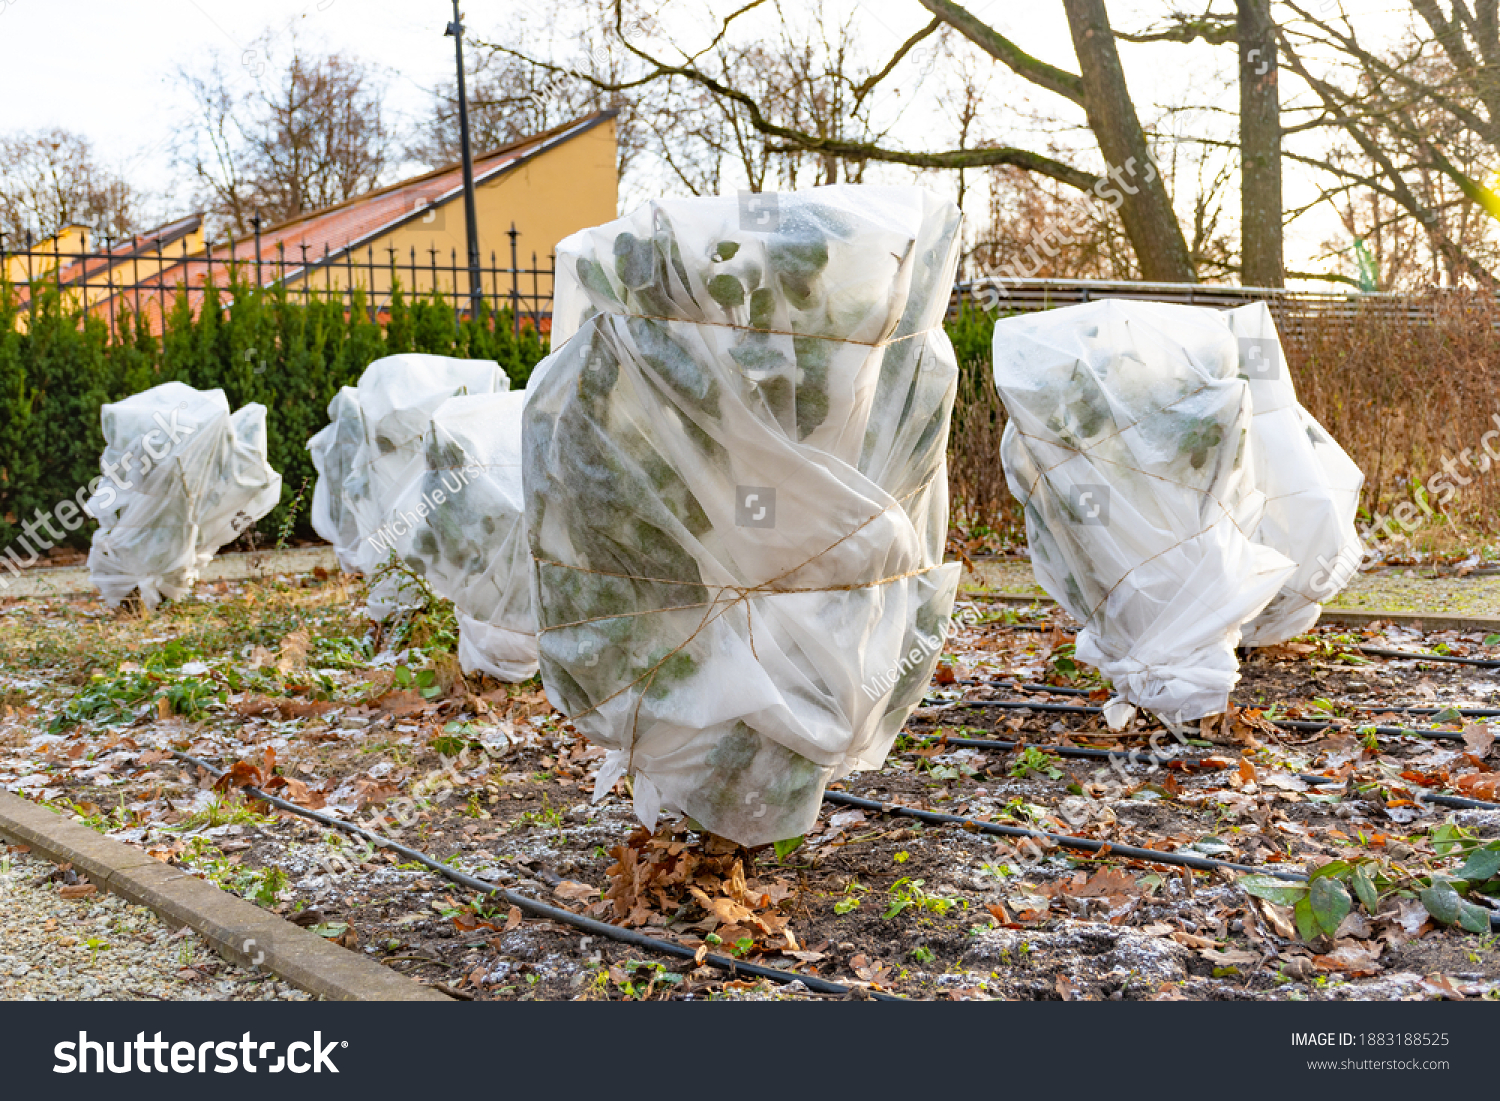 Plants and trees in a park or garden covered with blanket, swath of burlap, frost protection bags or roll of fabric to protect them from frost, freeze and cold temperature #1883188525